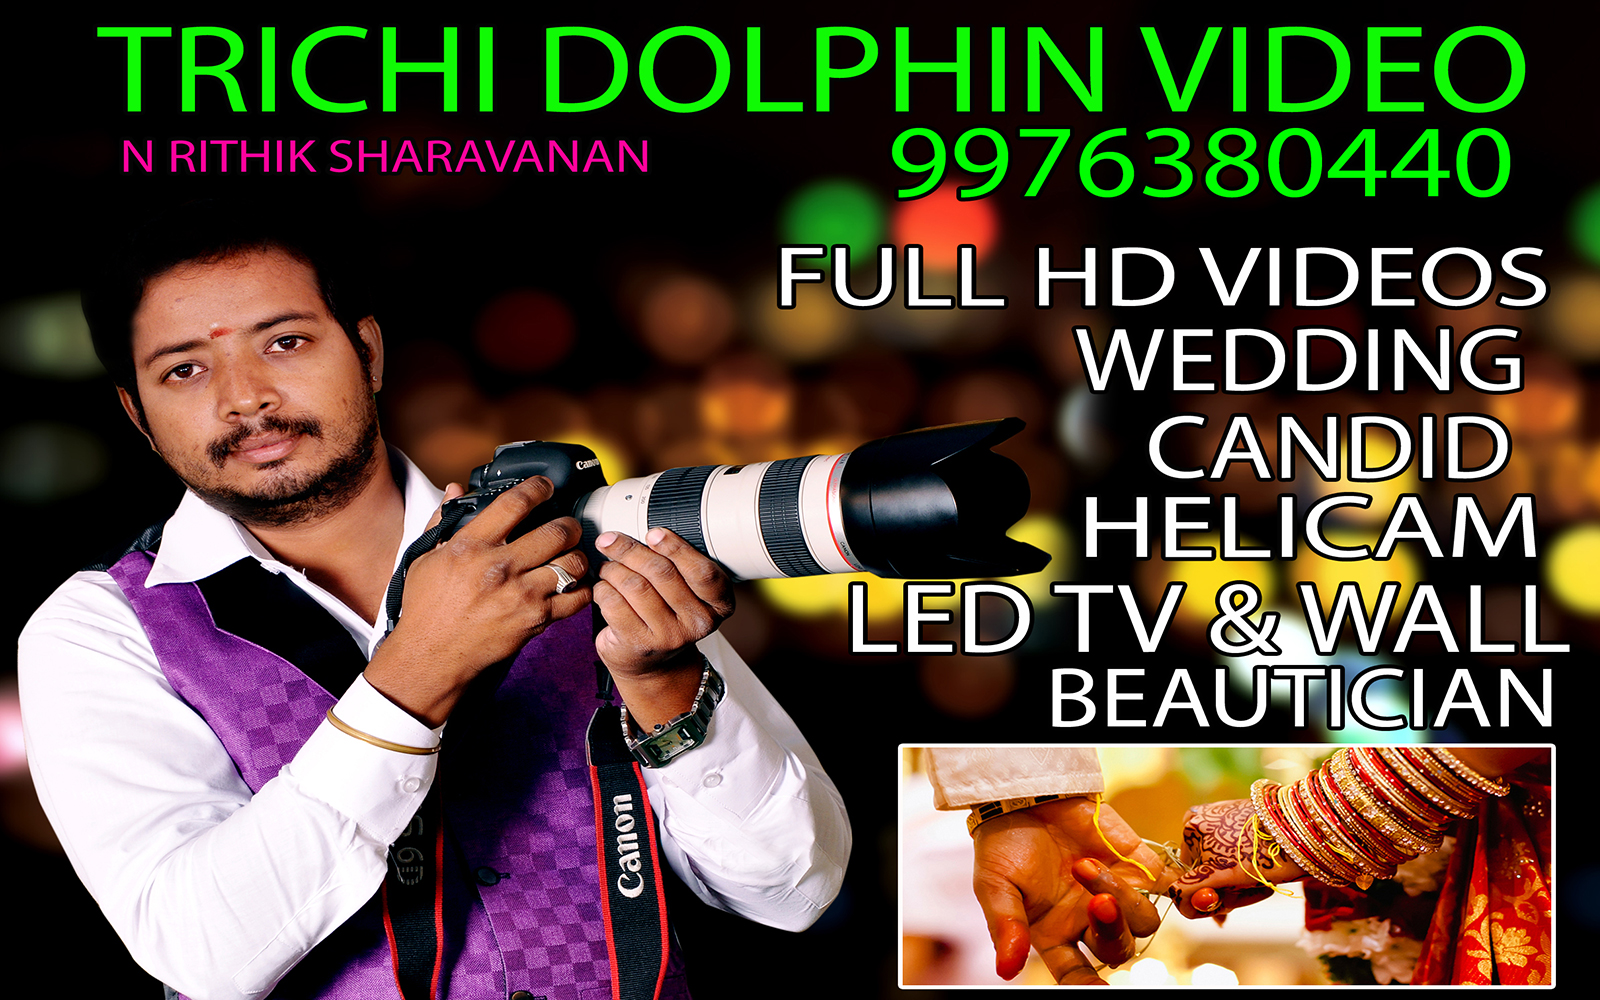 Trichy Dolphin Video|Catering Services|Event Services